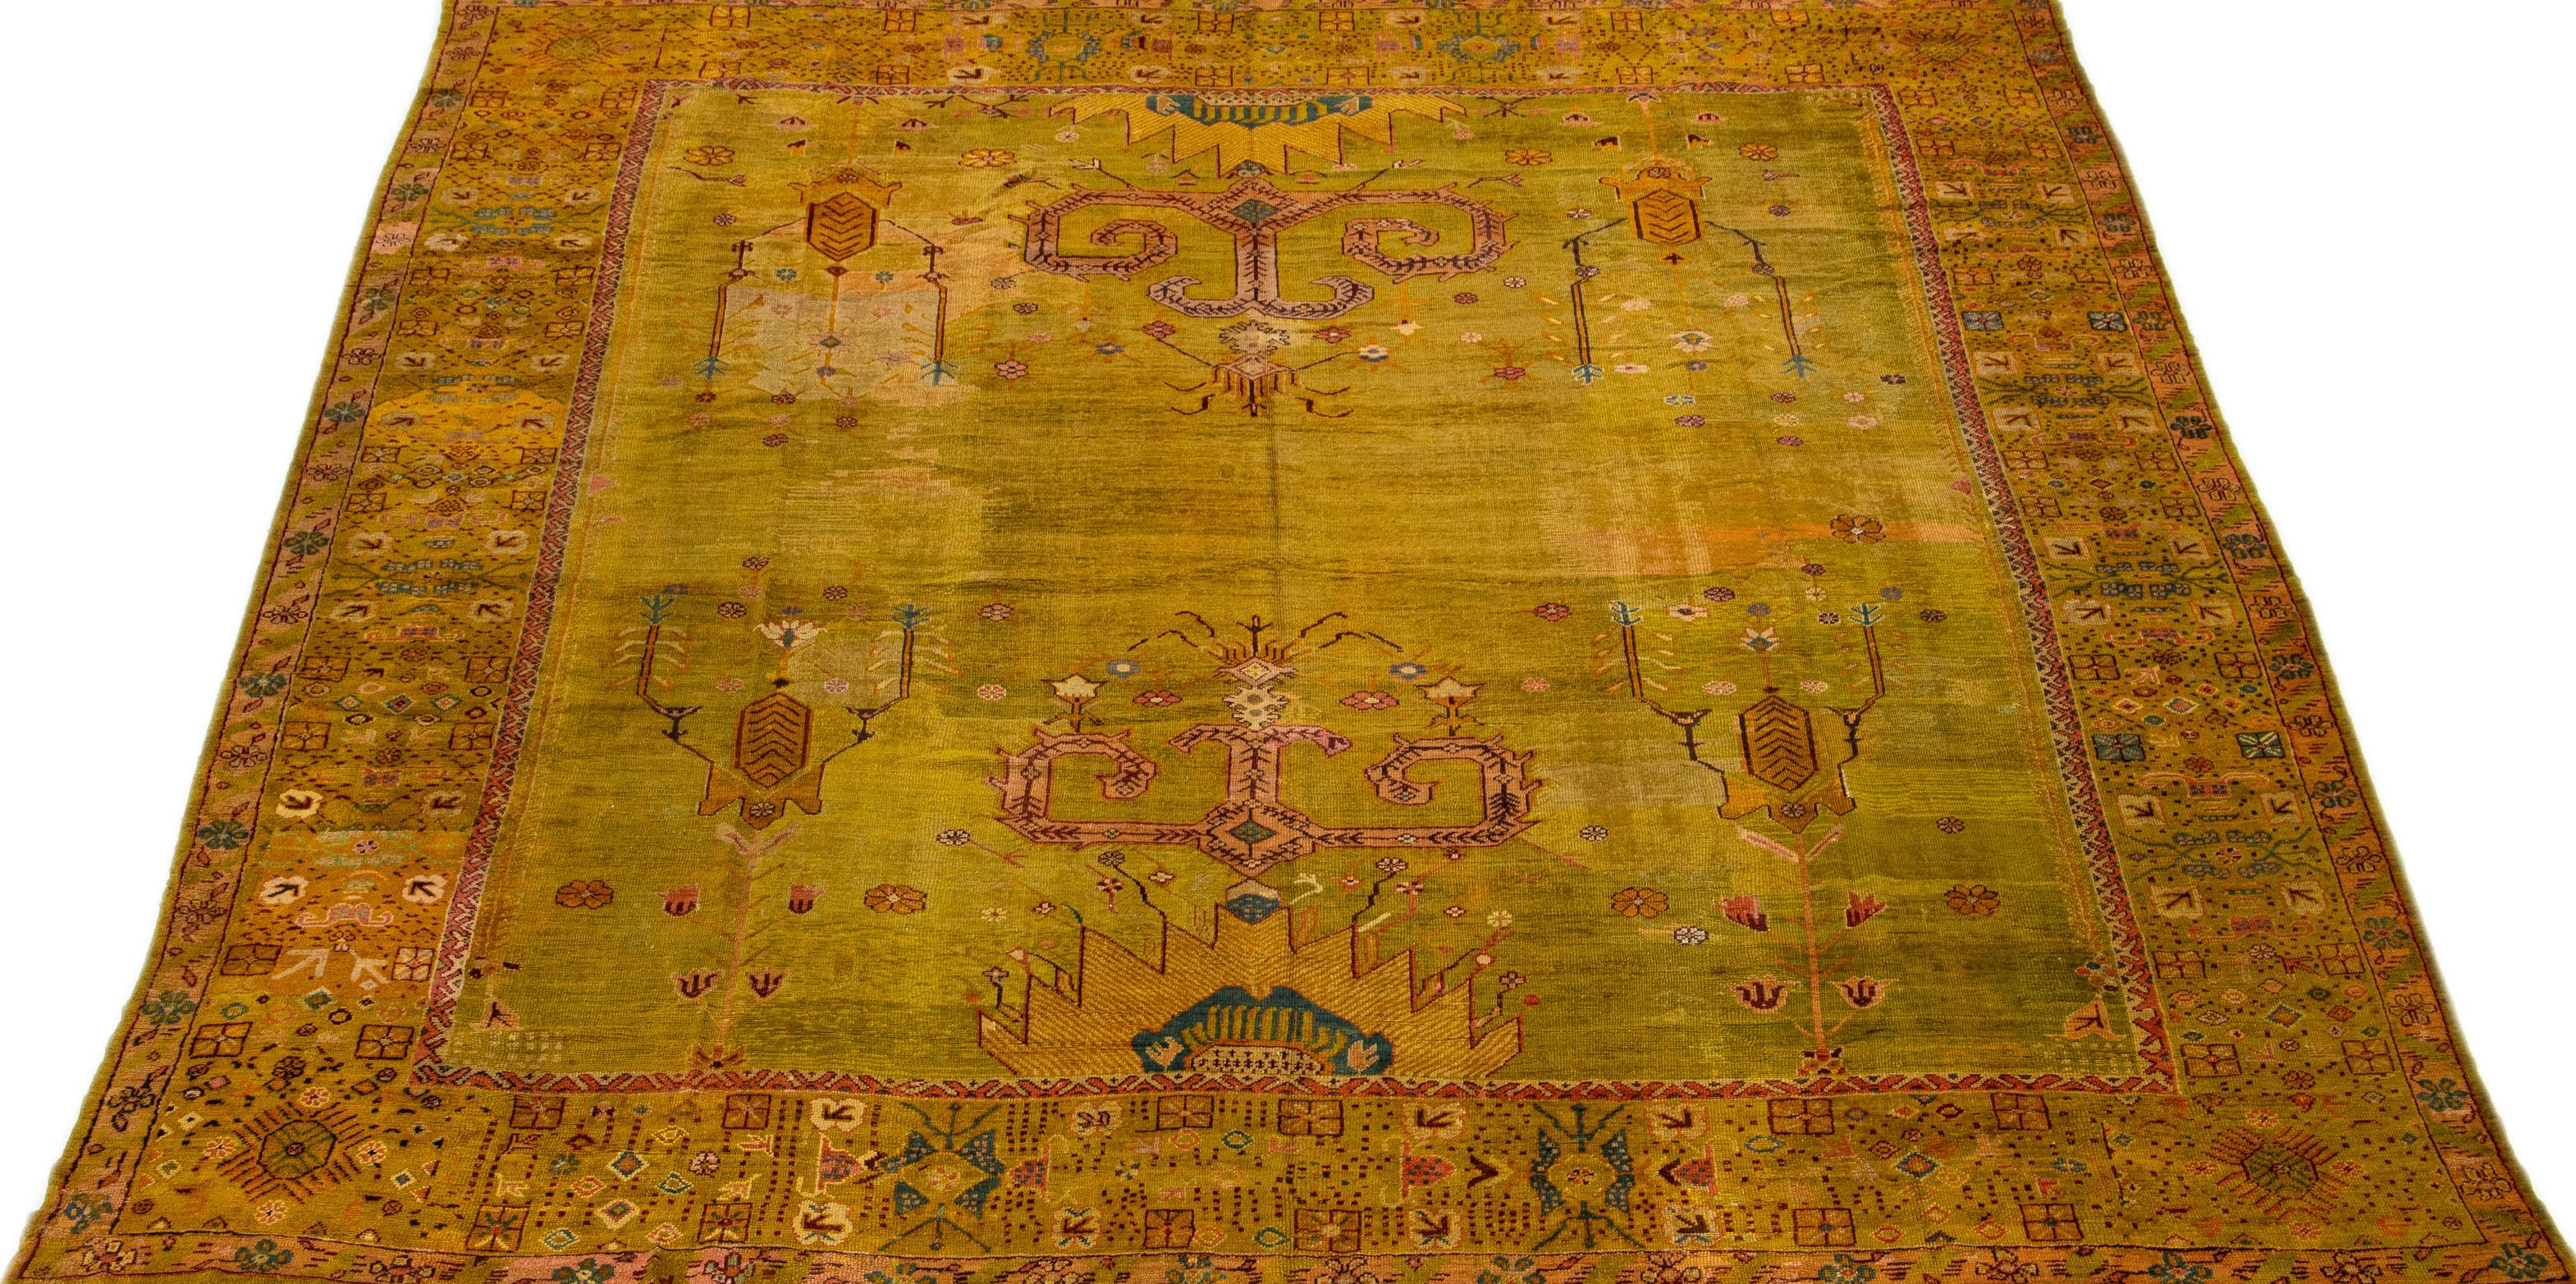 This exquisite hand knotted square wool rug from the 19th century Turkish Oushak collection features a stunning olive-yellow color field, complemented by elegant blue and rust accents arranged in a striking large scale floral pattern.

This rug